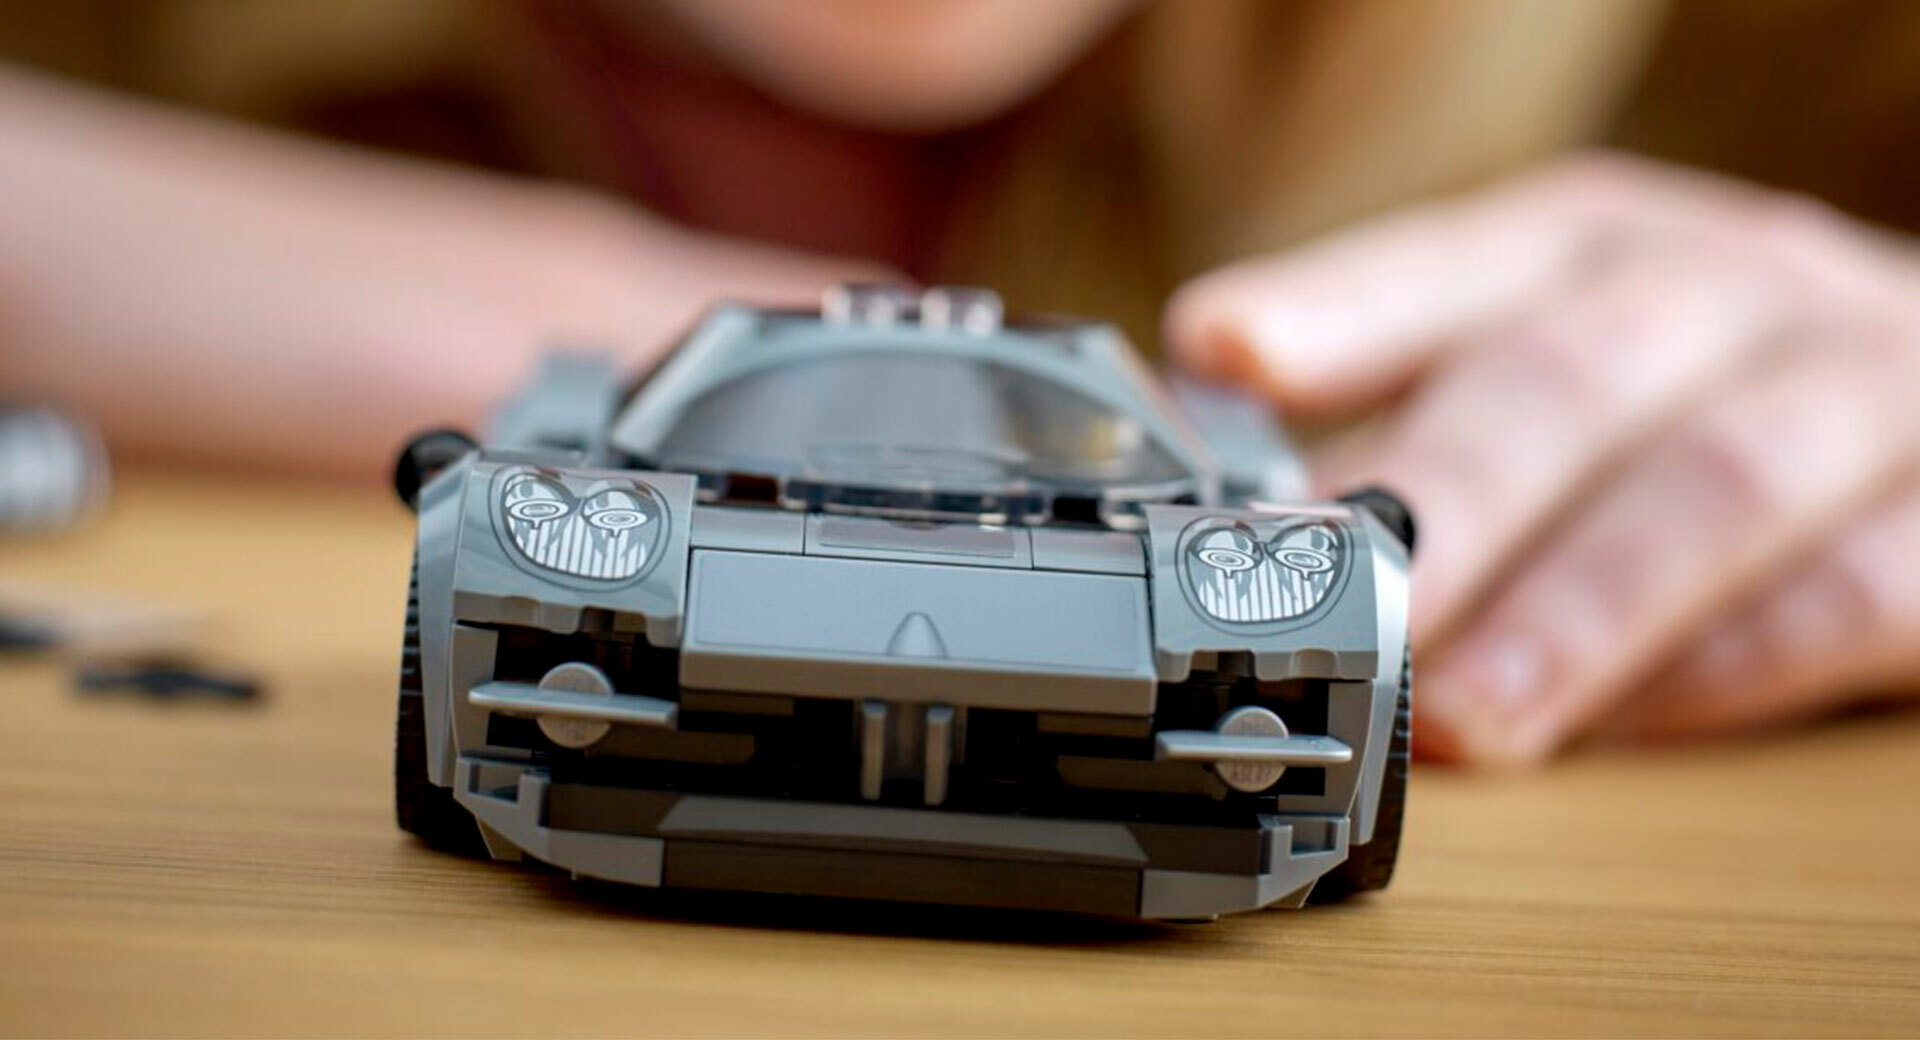 All you need to know about LEGO® Speed Champions – The Porsche collection